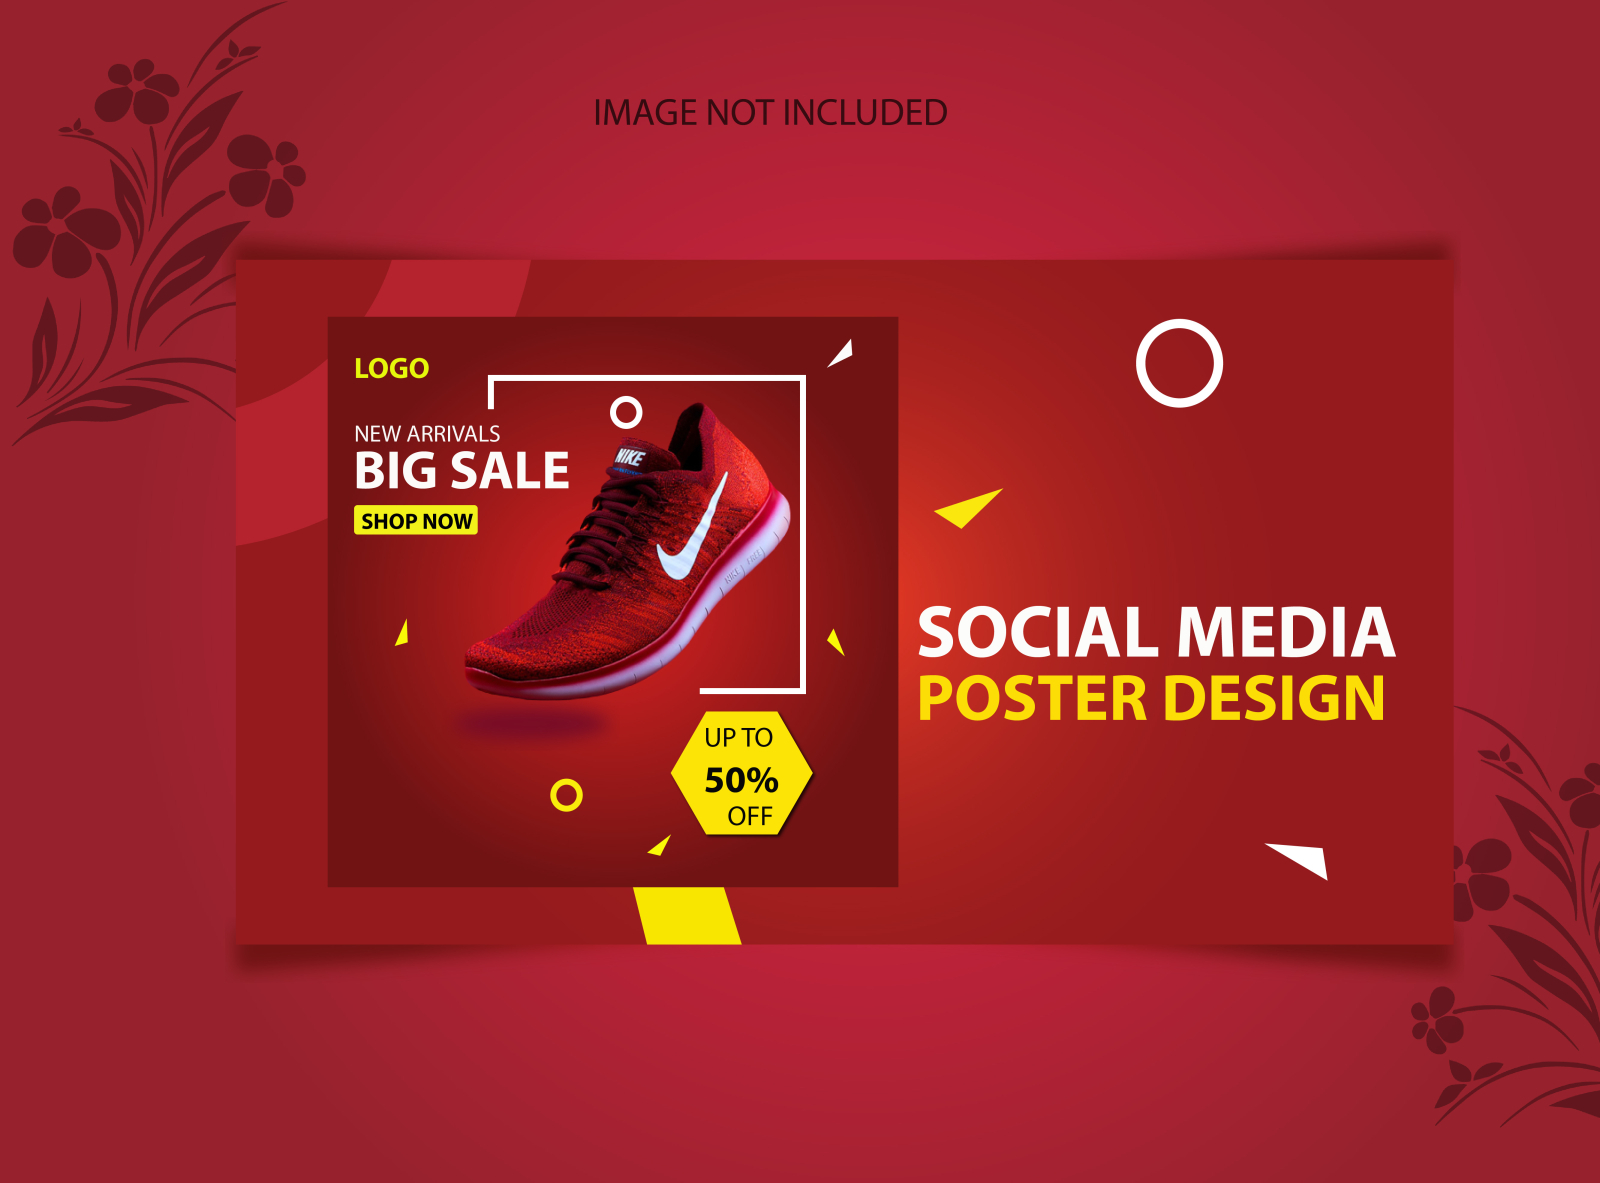 Free Photoshop Social Media Poster Design Template by Tawsif on Dribbble